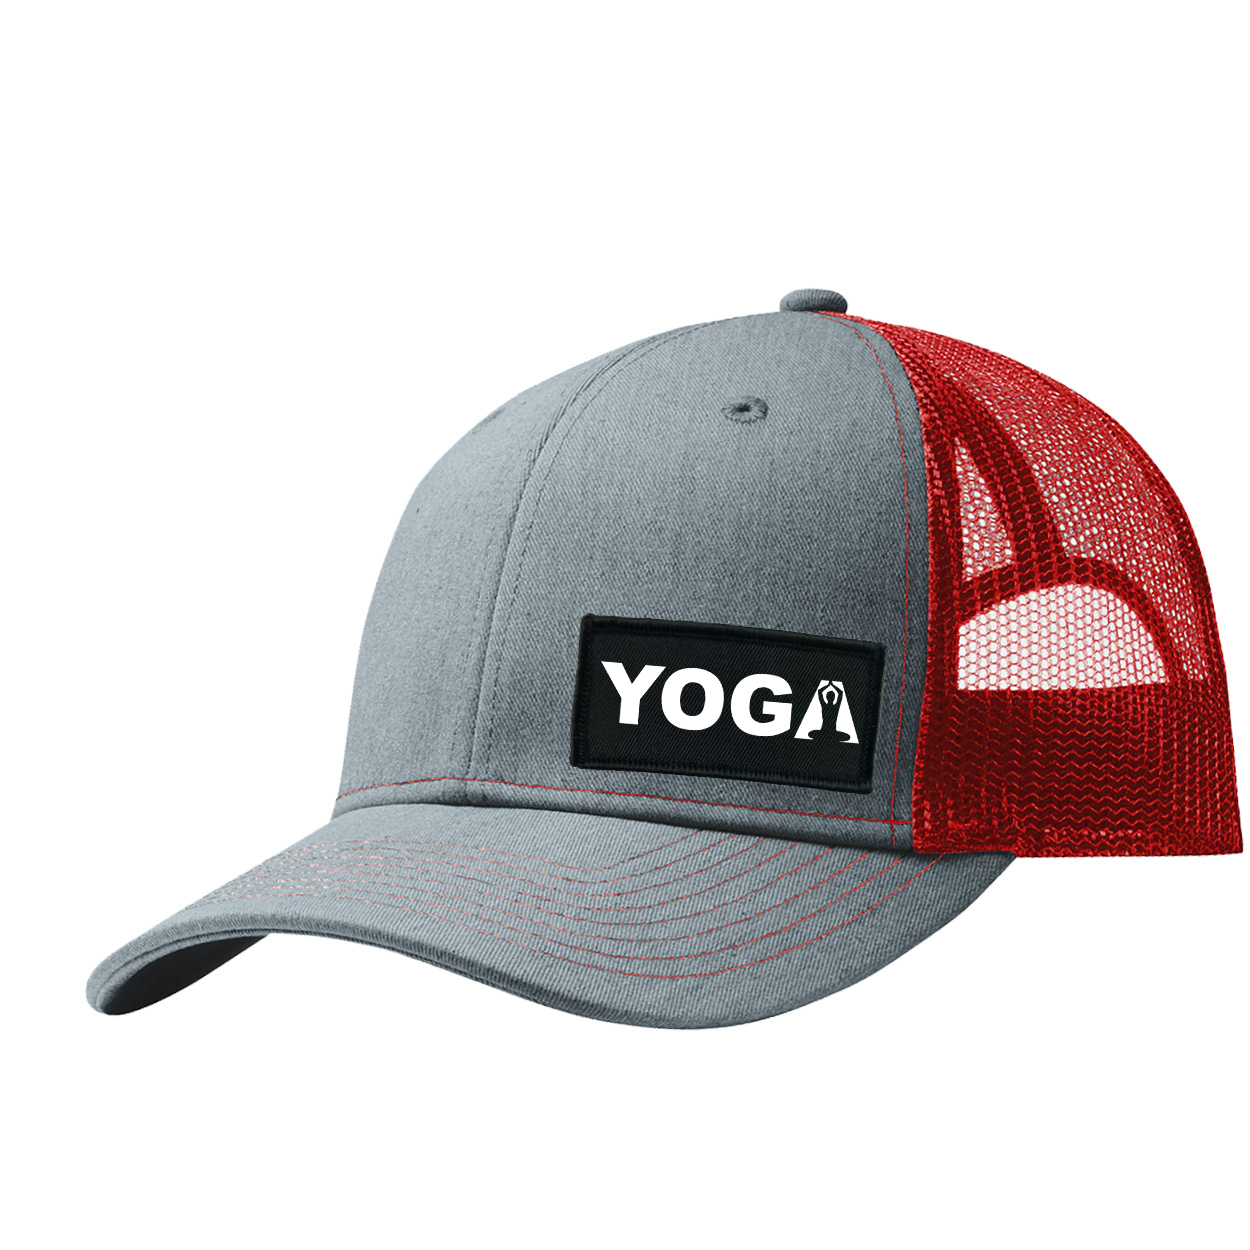 Yoga Meditation Logo Night Out Woven Patch Snapback Trucker Hat Heather Heather Grey/Red (White Logo)